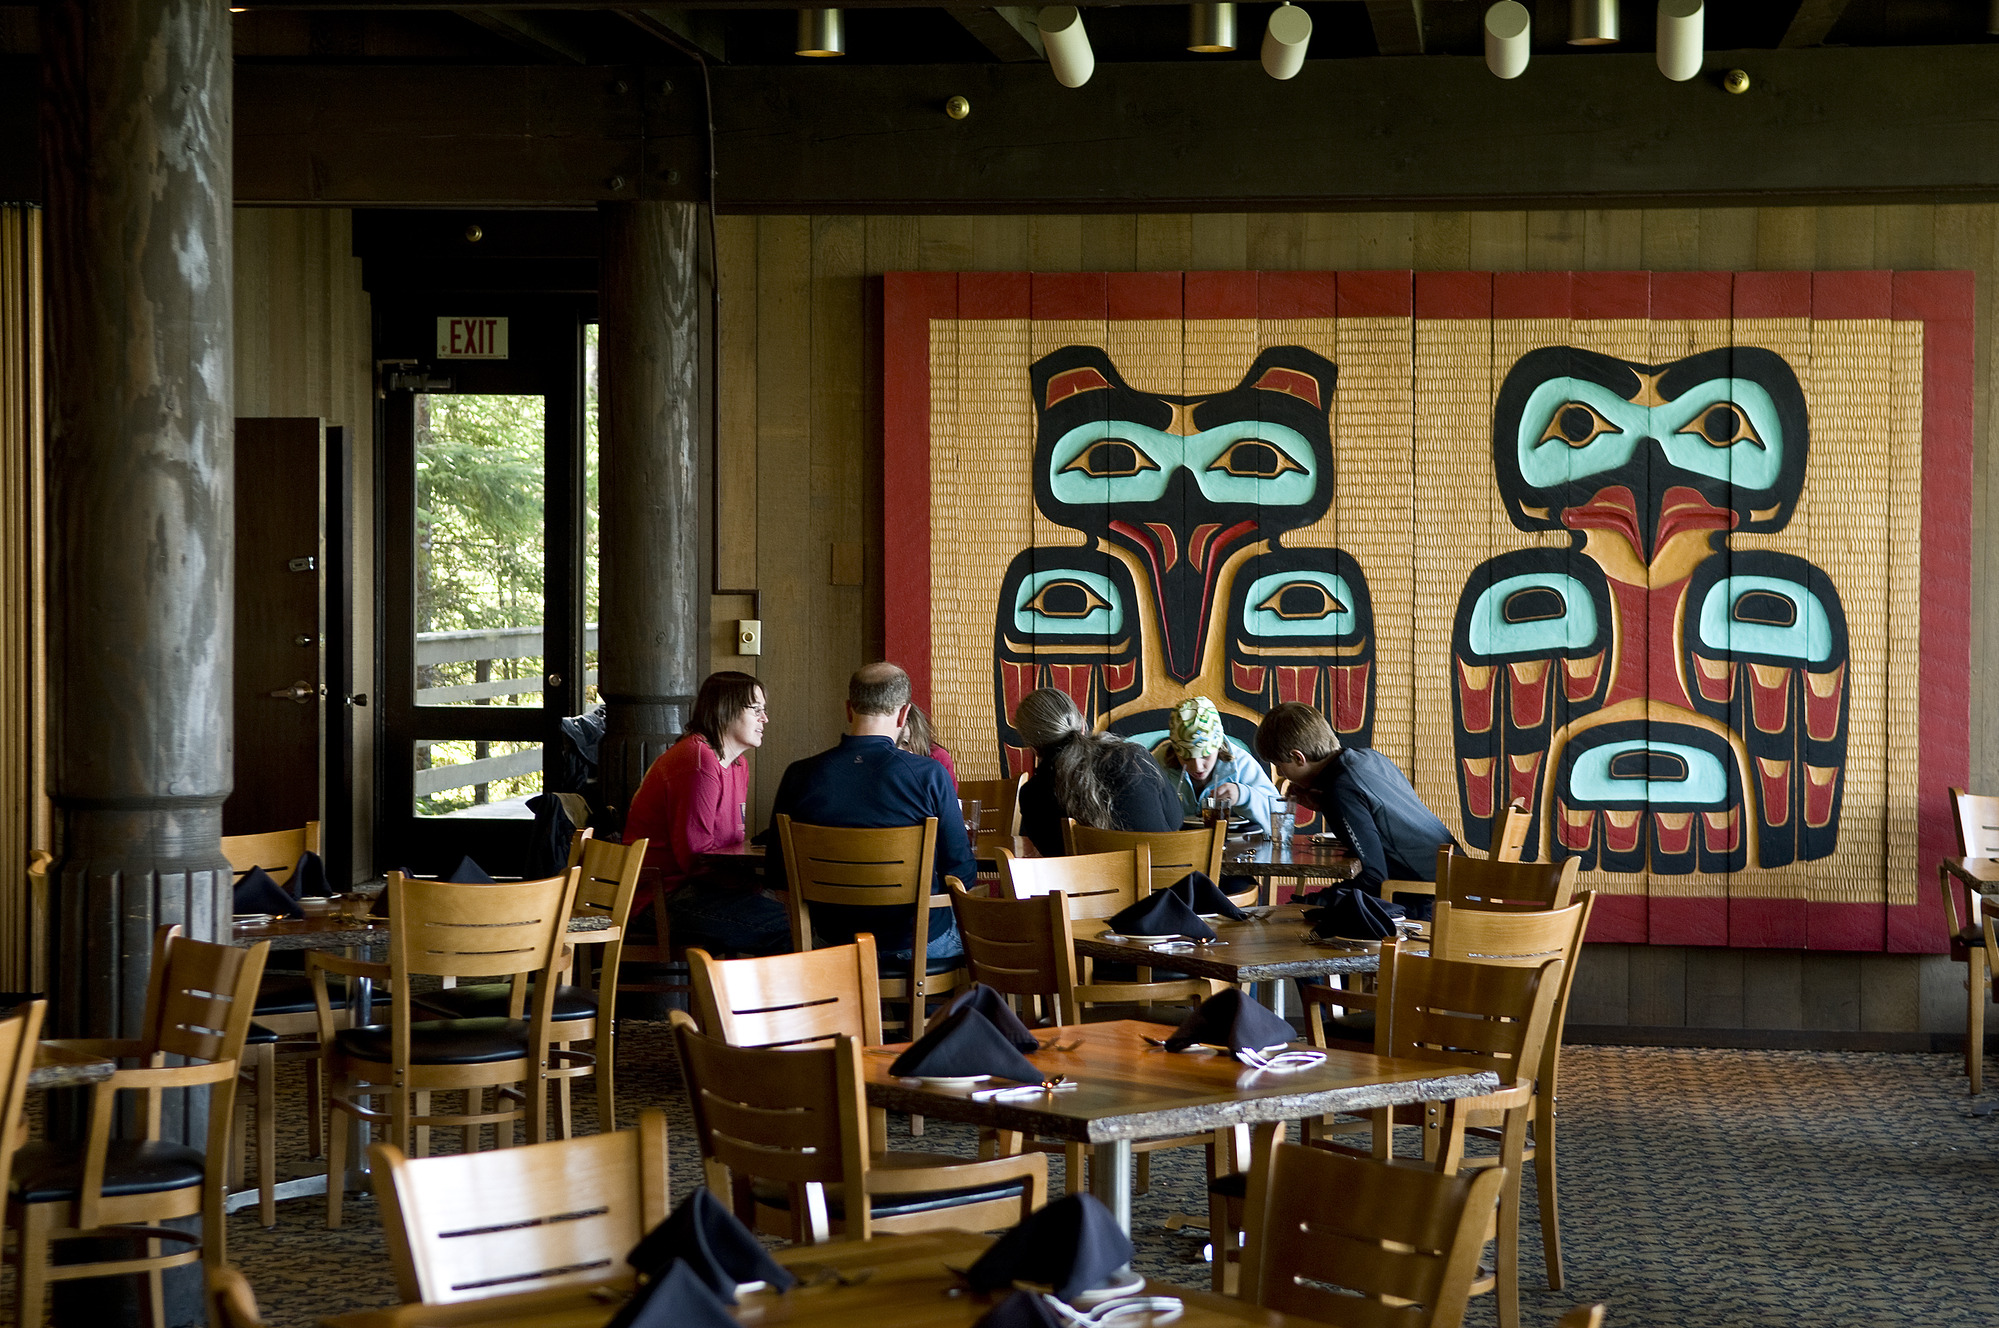 Several people sit at a table in the Glacier Bay Lodge, Tlingit formline art covers the wall behind the group.